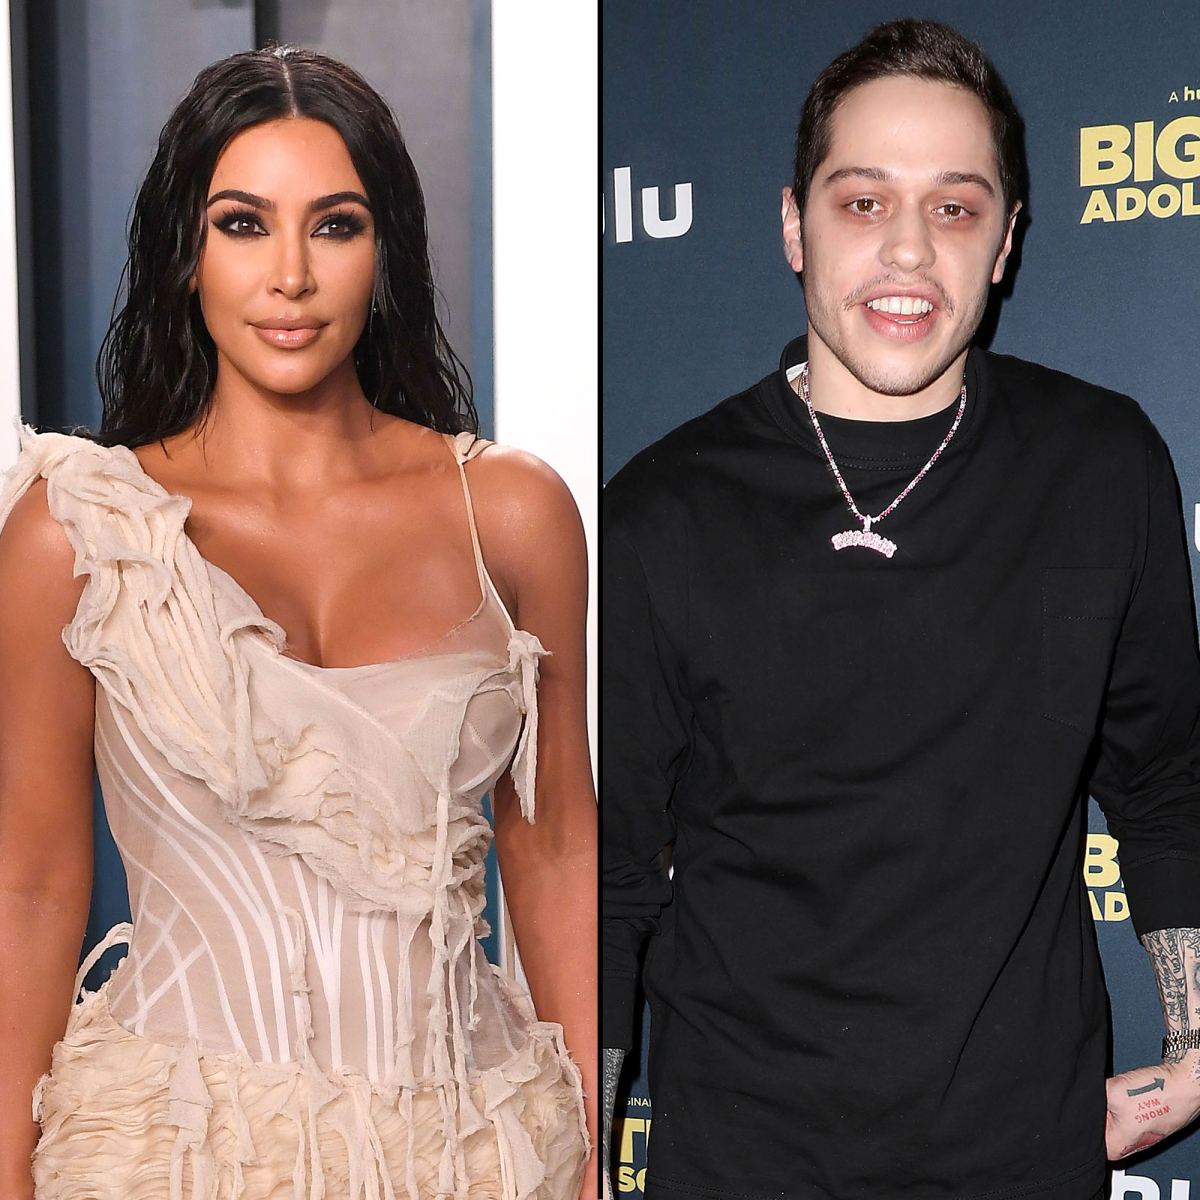 Kardashian and Davidson were spotted together at Knott's Scary Farm in California with Kourtney Kardashian and her fiance Travis Barker and other friends less than a month after the reality star made her debut on the sketch comedy show.